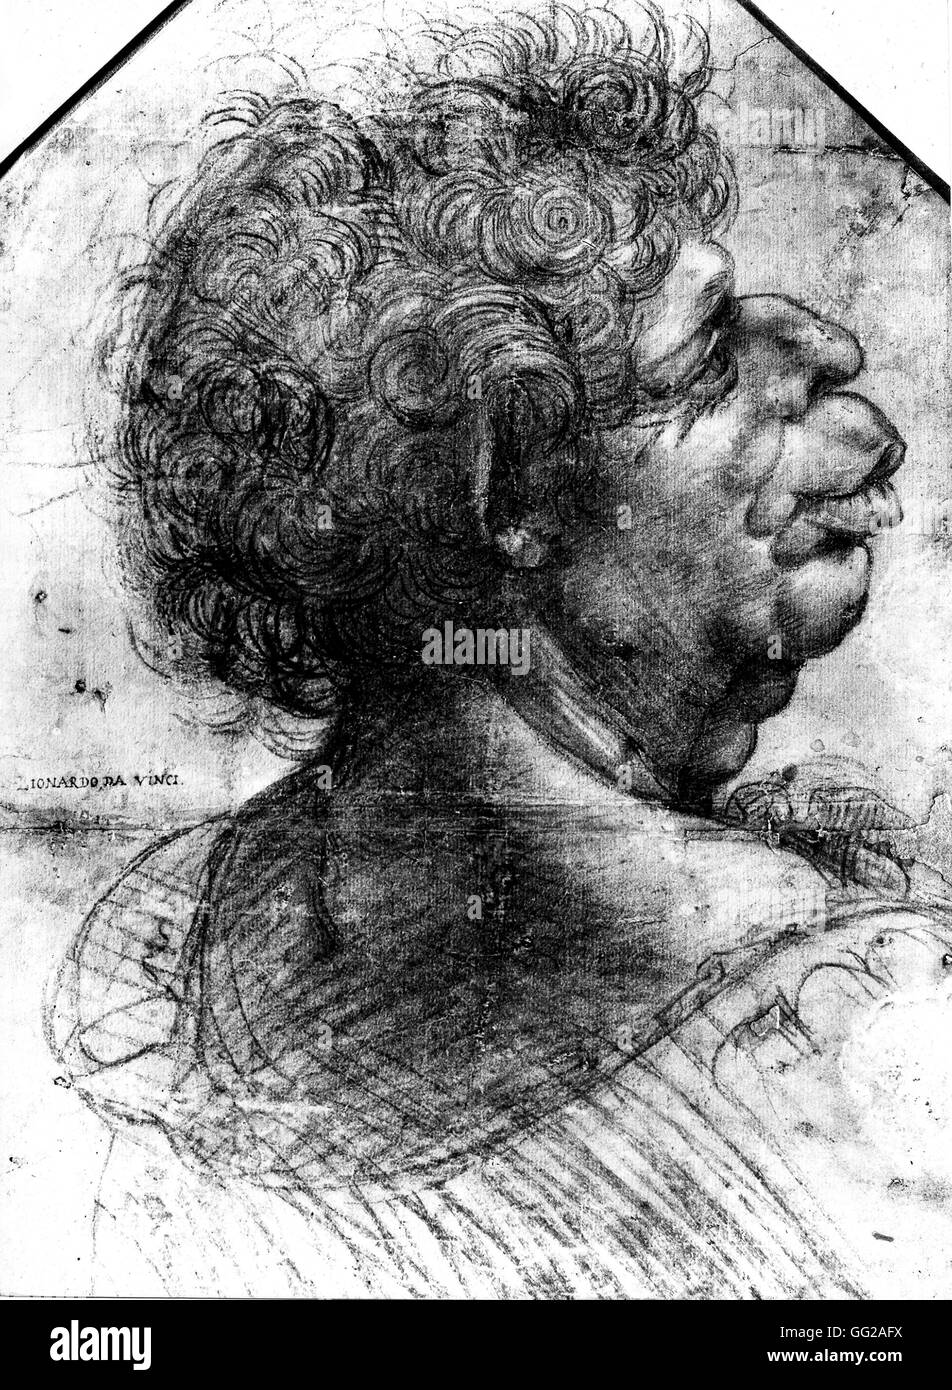 Leonardo da Vinci Italian school A Grotesque Head 1502 Chalk drawing published in 'Sketches and studies of grotesque heads'. The original drawing is located at the Royal Library at Windsor Castle. Oxford, Bodleian Library Stock Photo